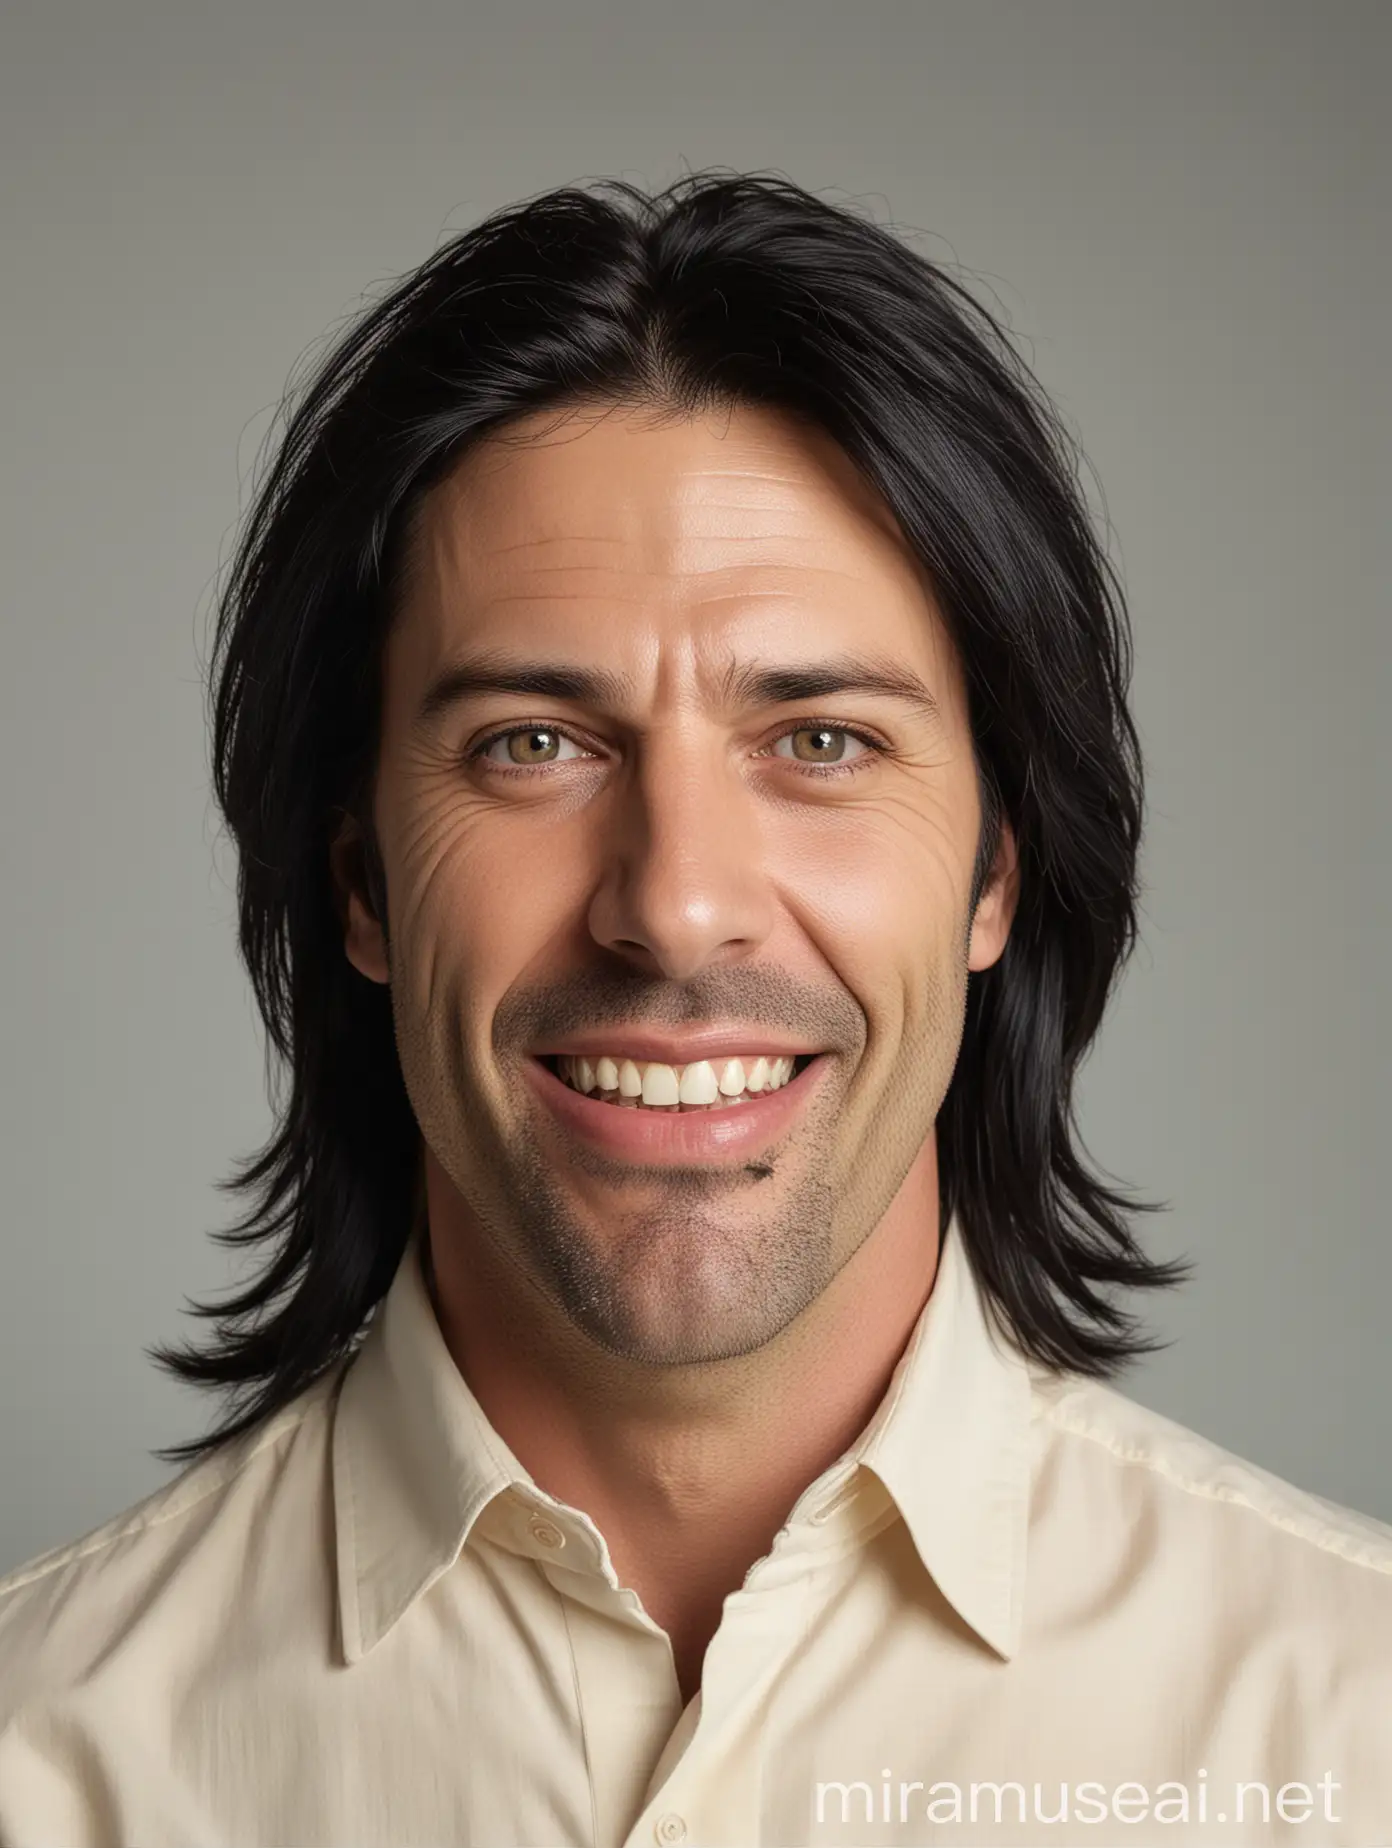 photo of a 45 year old man with long black hair, buck teeth, wearing a cream colored shirt, with symmetrical eyes, in 32k resolution